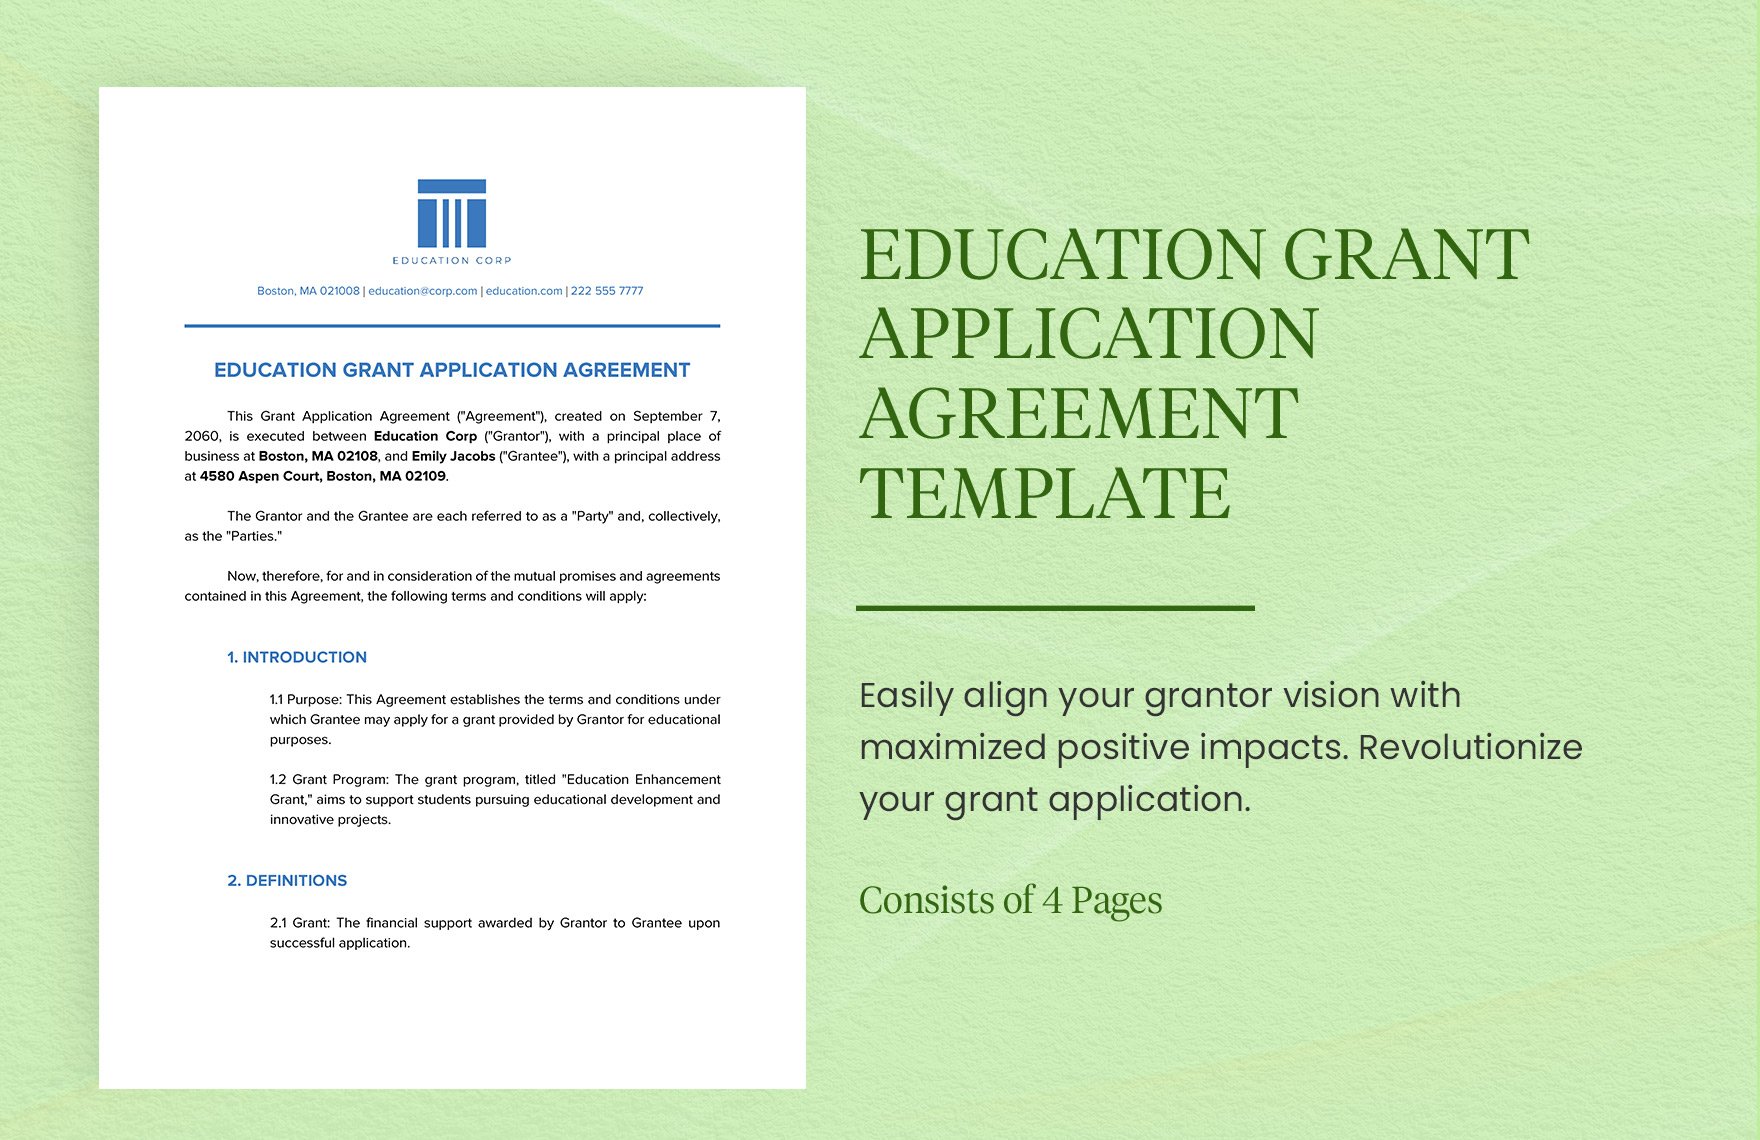 Education Grant Application Agreement Template